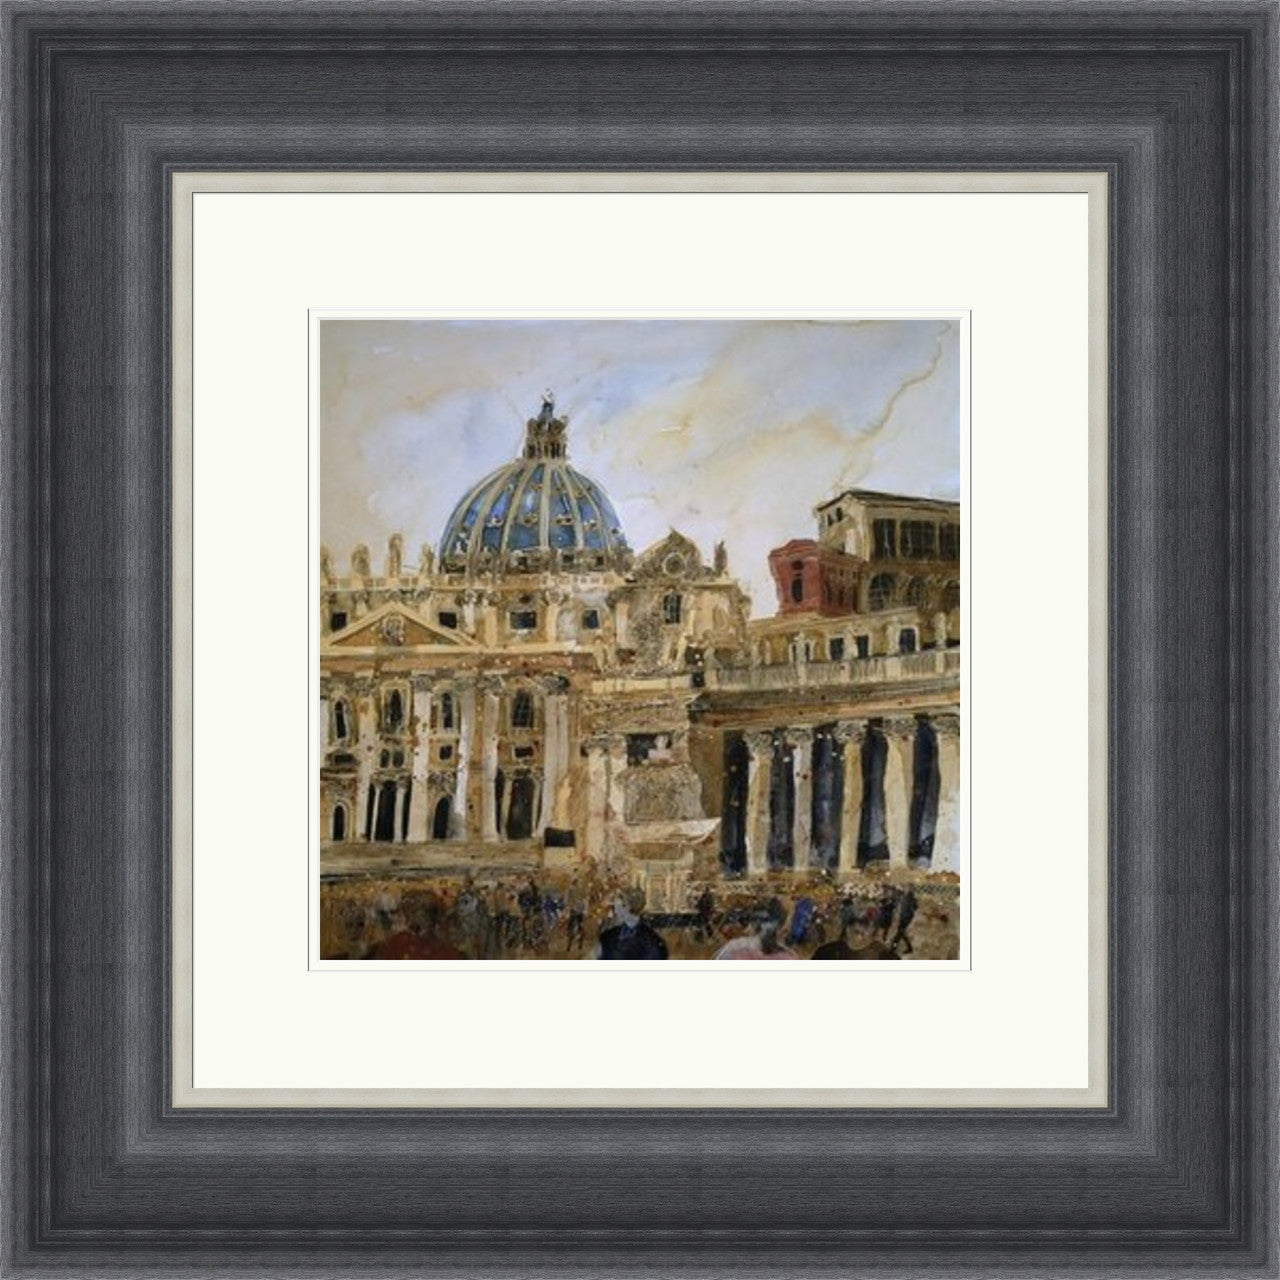 The Vatican Rome by Susan Brown